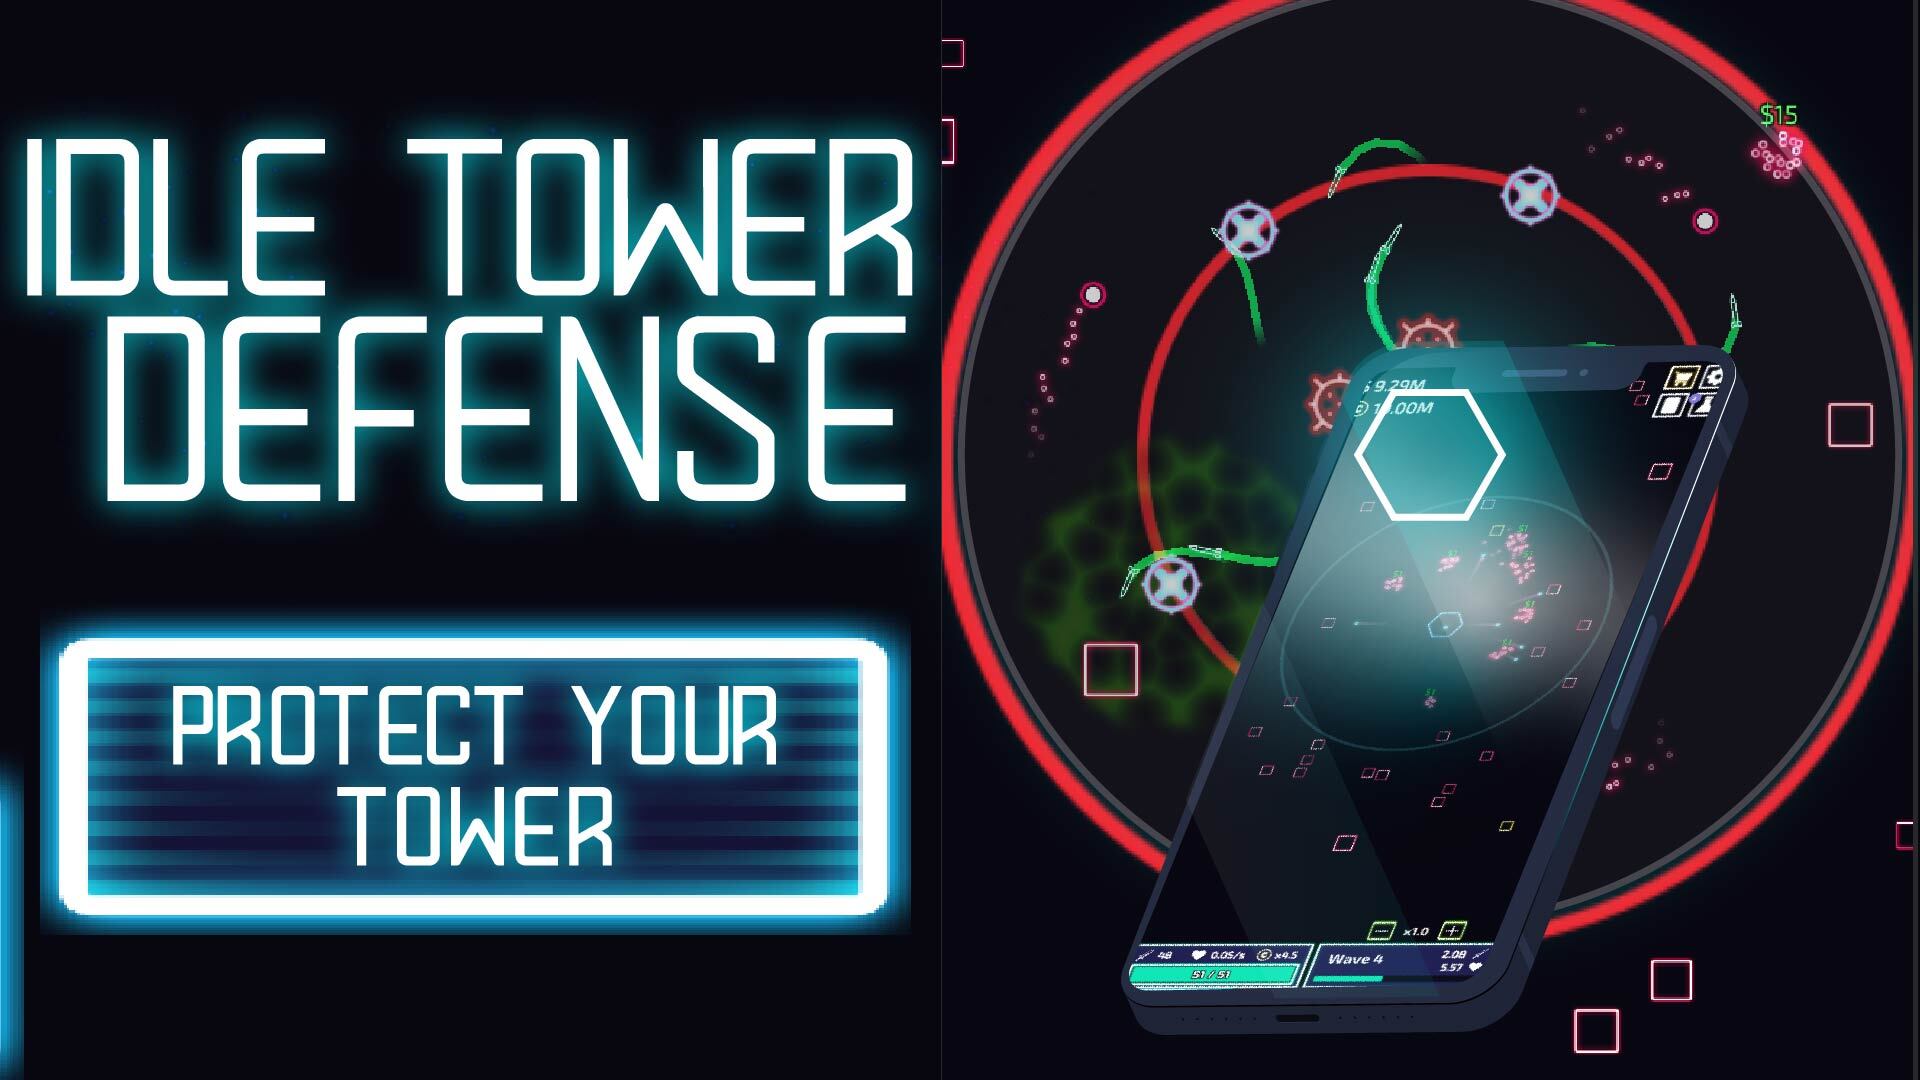 Play The Tower - Idle Tower Defense Online